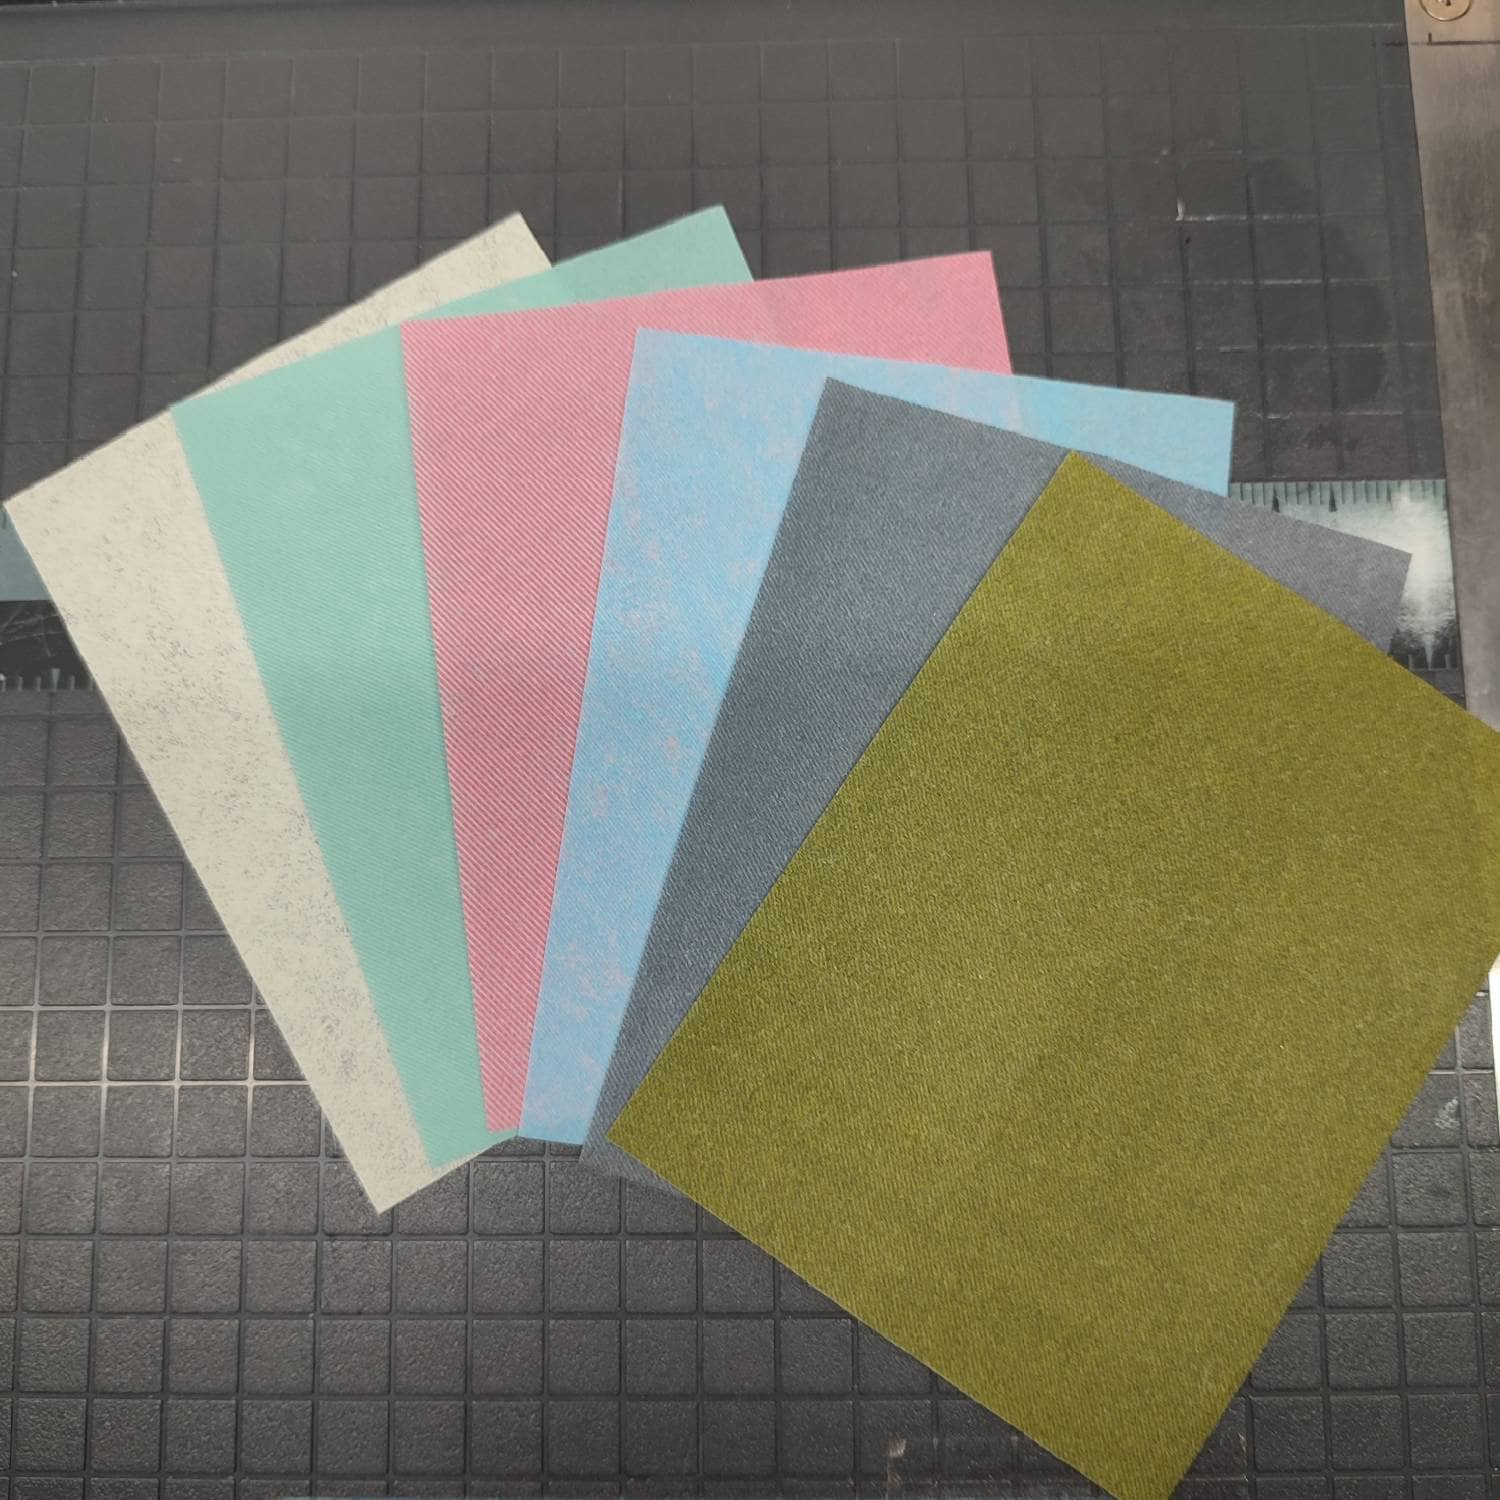 Wet/Dry Polishing Papers, 1,200 grit, 9 Micron Sheet Light Blue